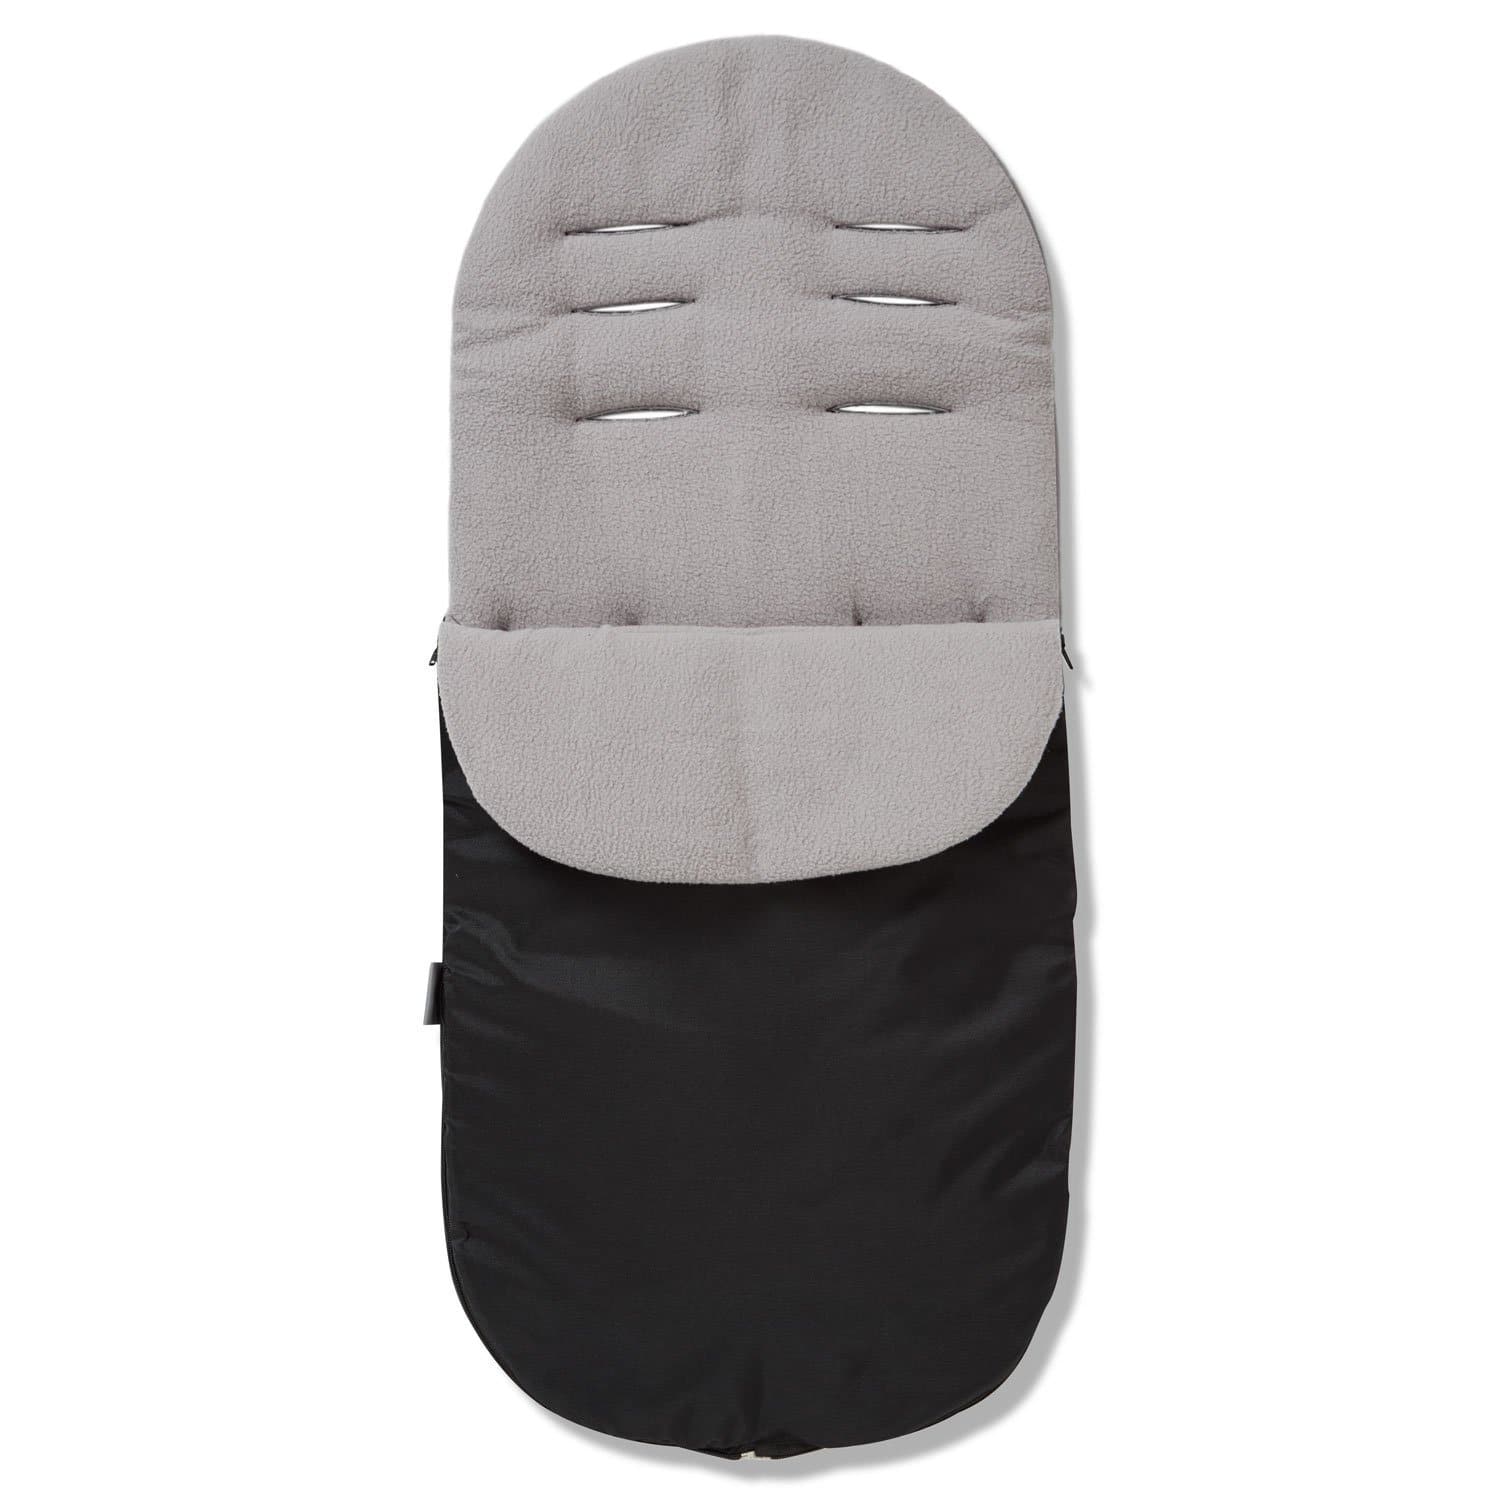 Footmuff / Cosy Toes Compatible with XTS - Grey / Fits All Models | For Your Little One